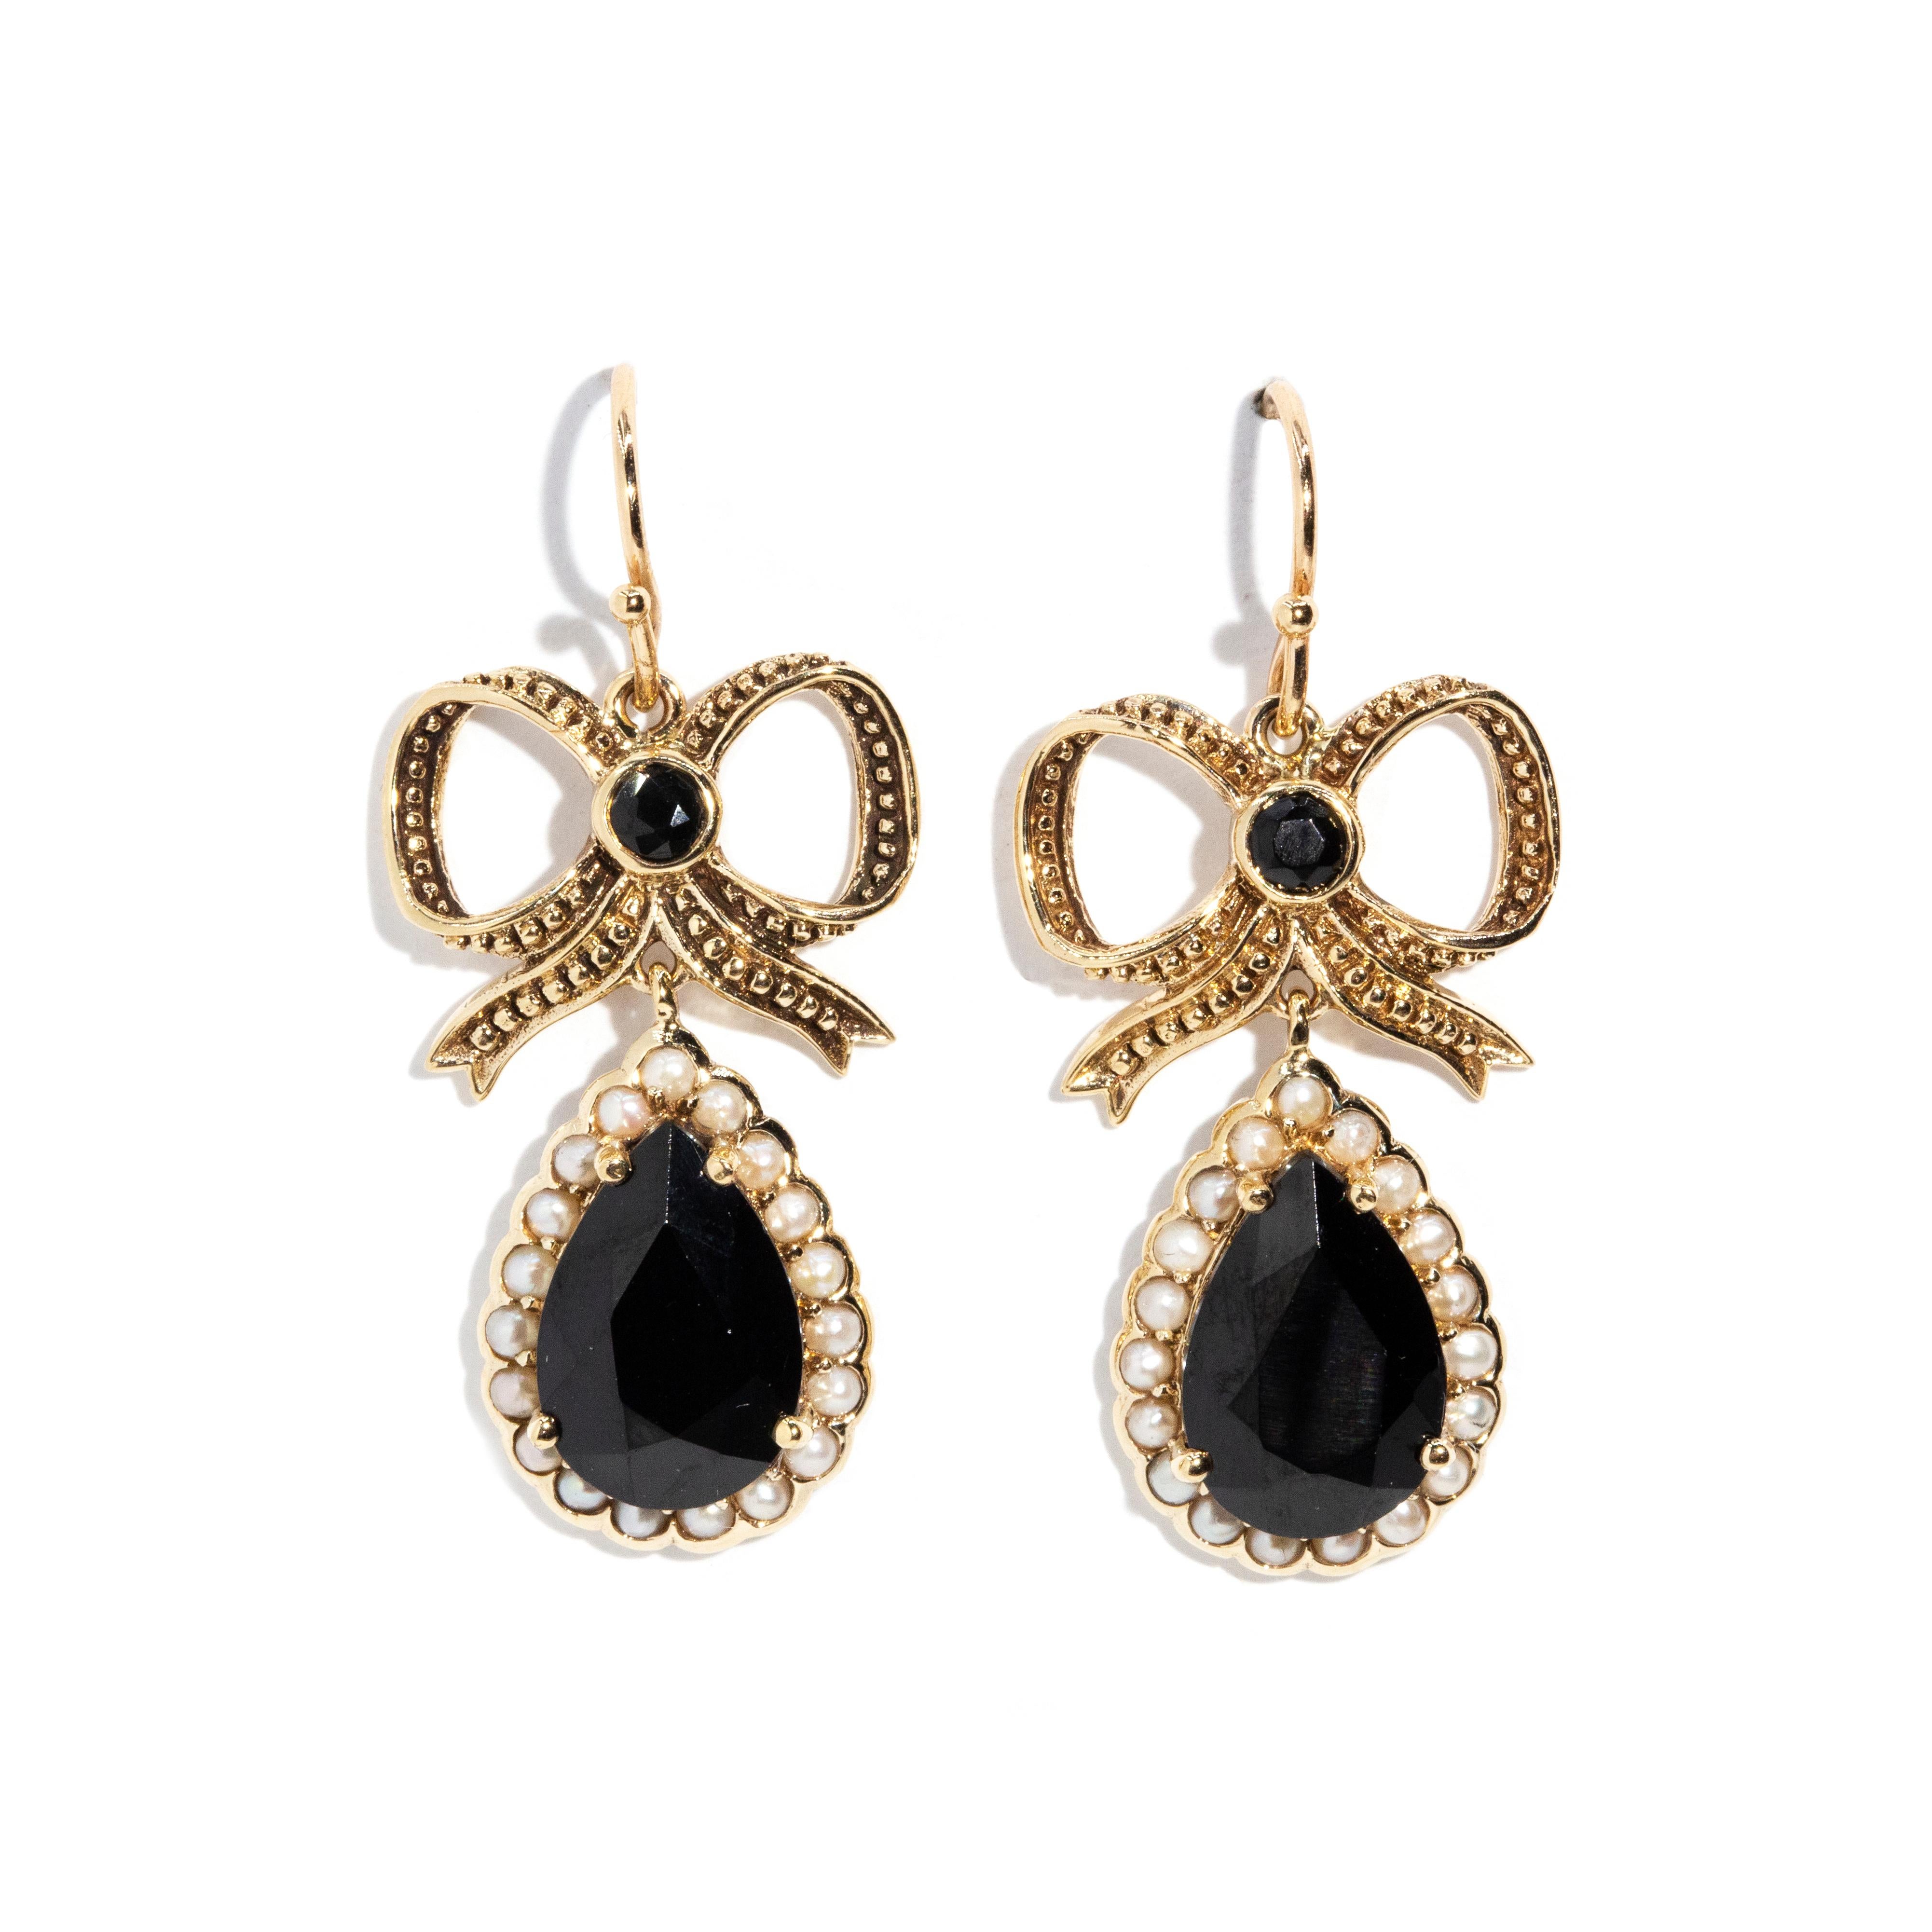 Contemporary Vintage Inspired Black Onyx & Seed Pearl Bow Drop Earrings 9 Carat Yellow Gold